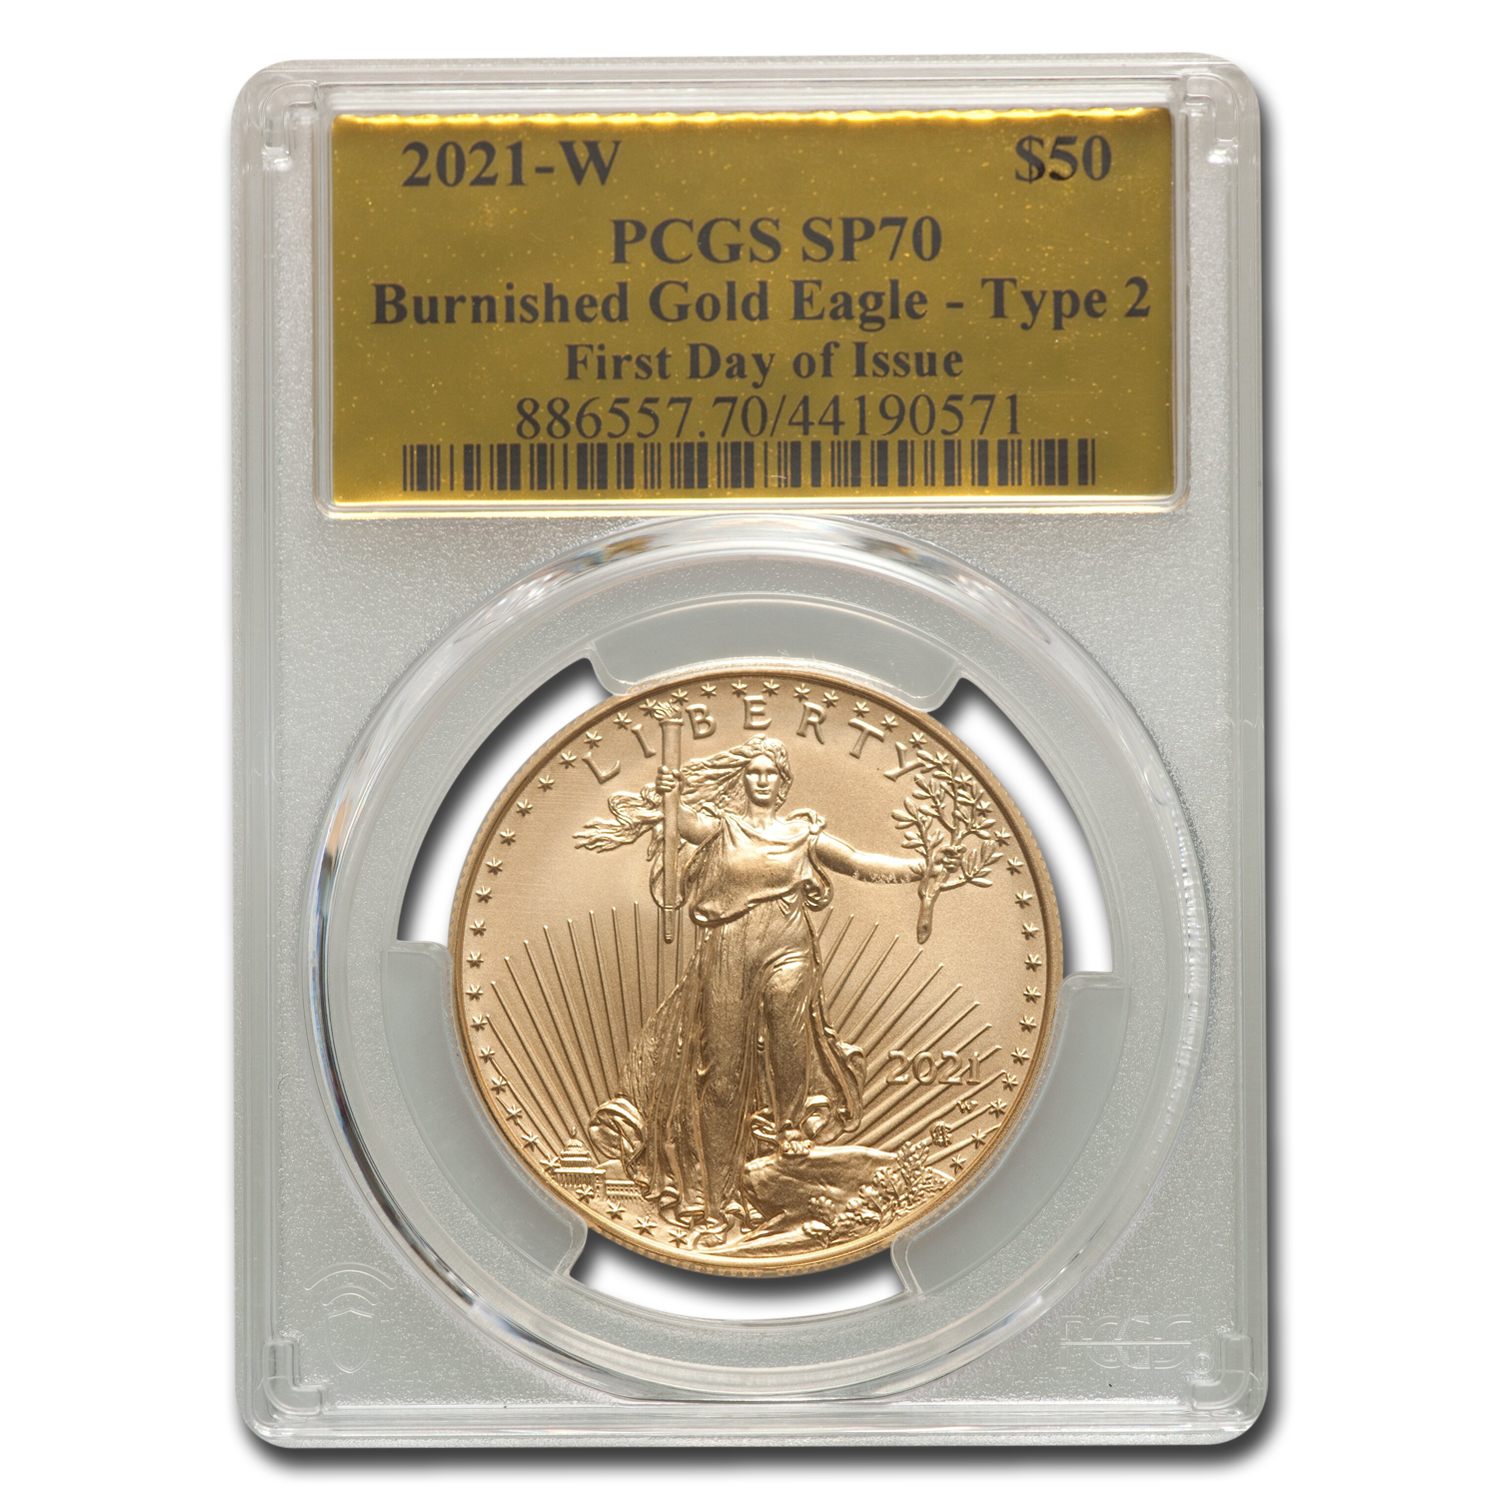 Buy 2021-W 1 oz Burnished Gold Eagle Type 2 SP-70 PCGS (FD Gold Foil) - Click Image to Close